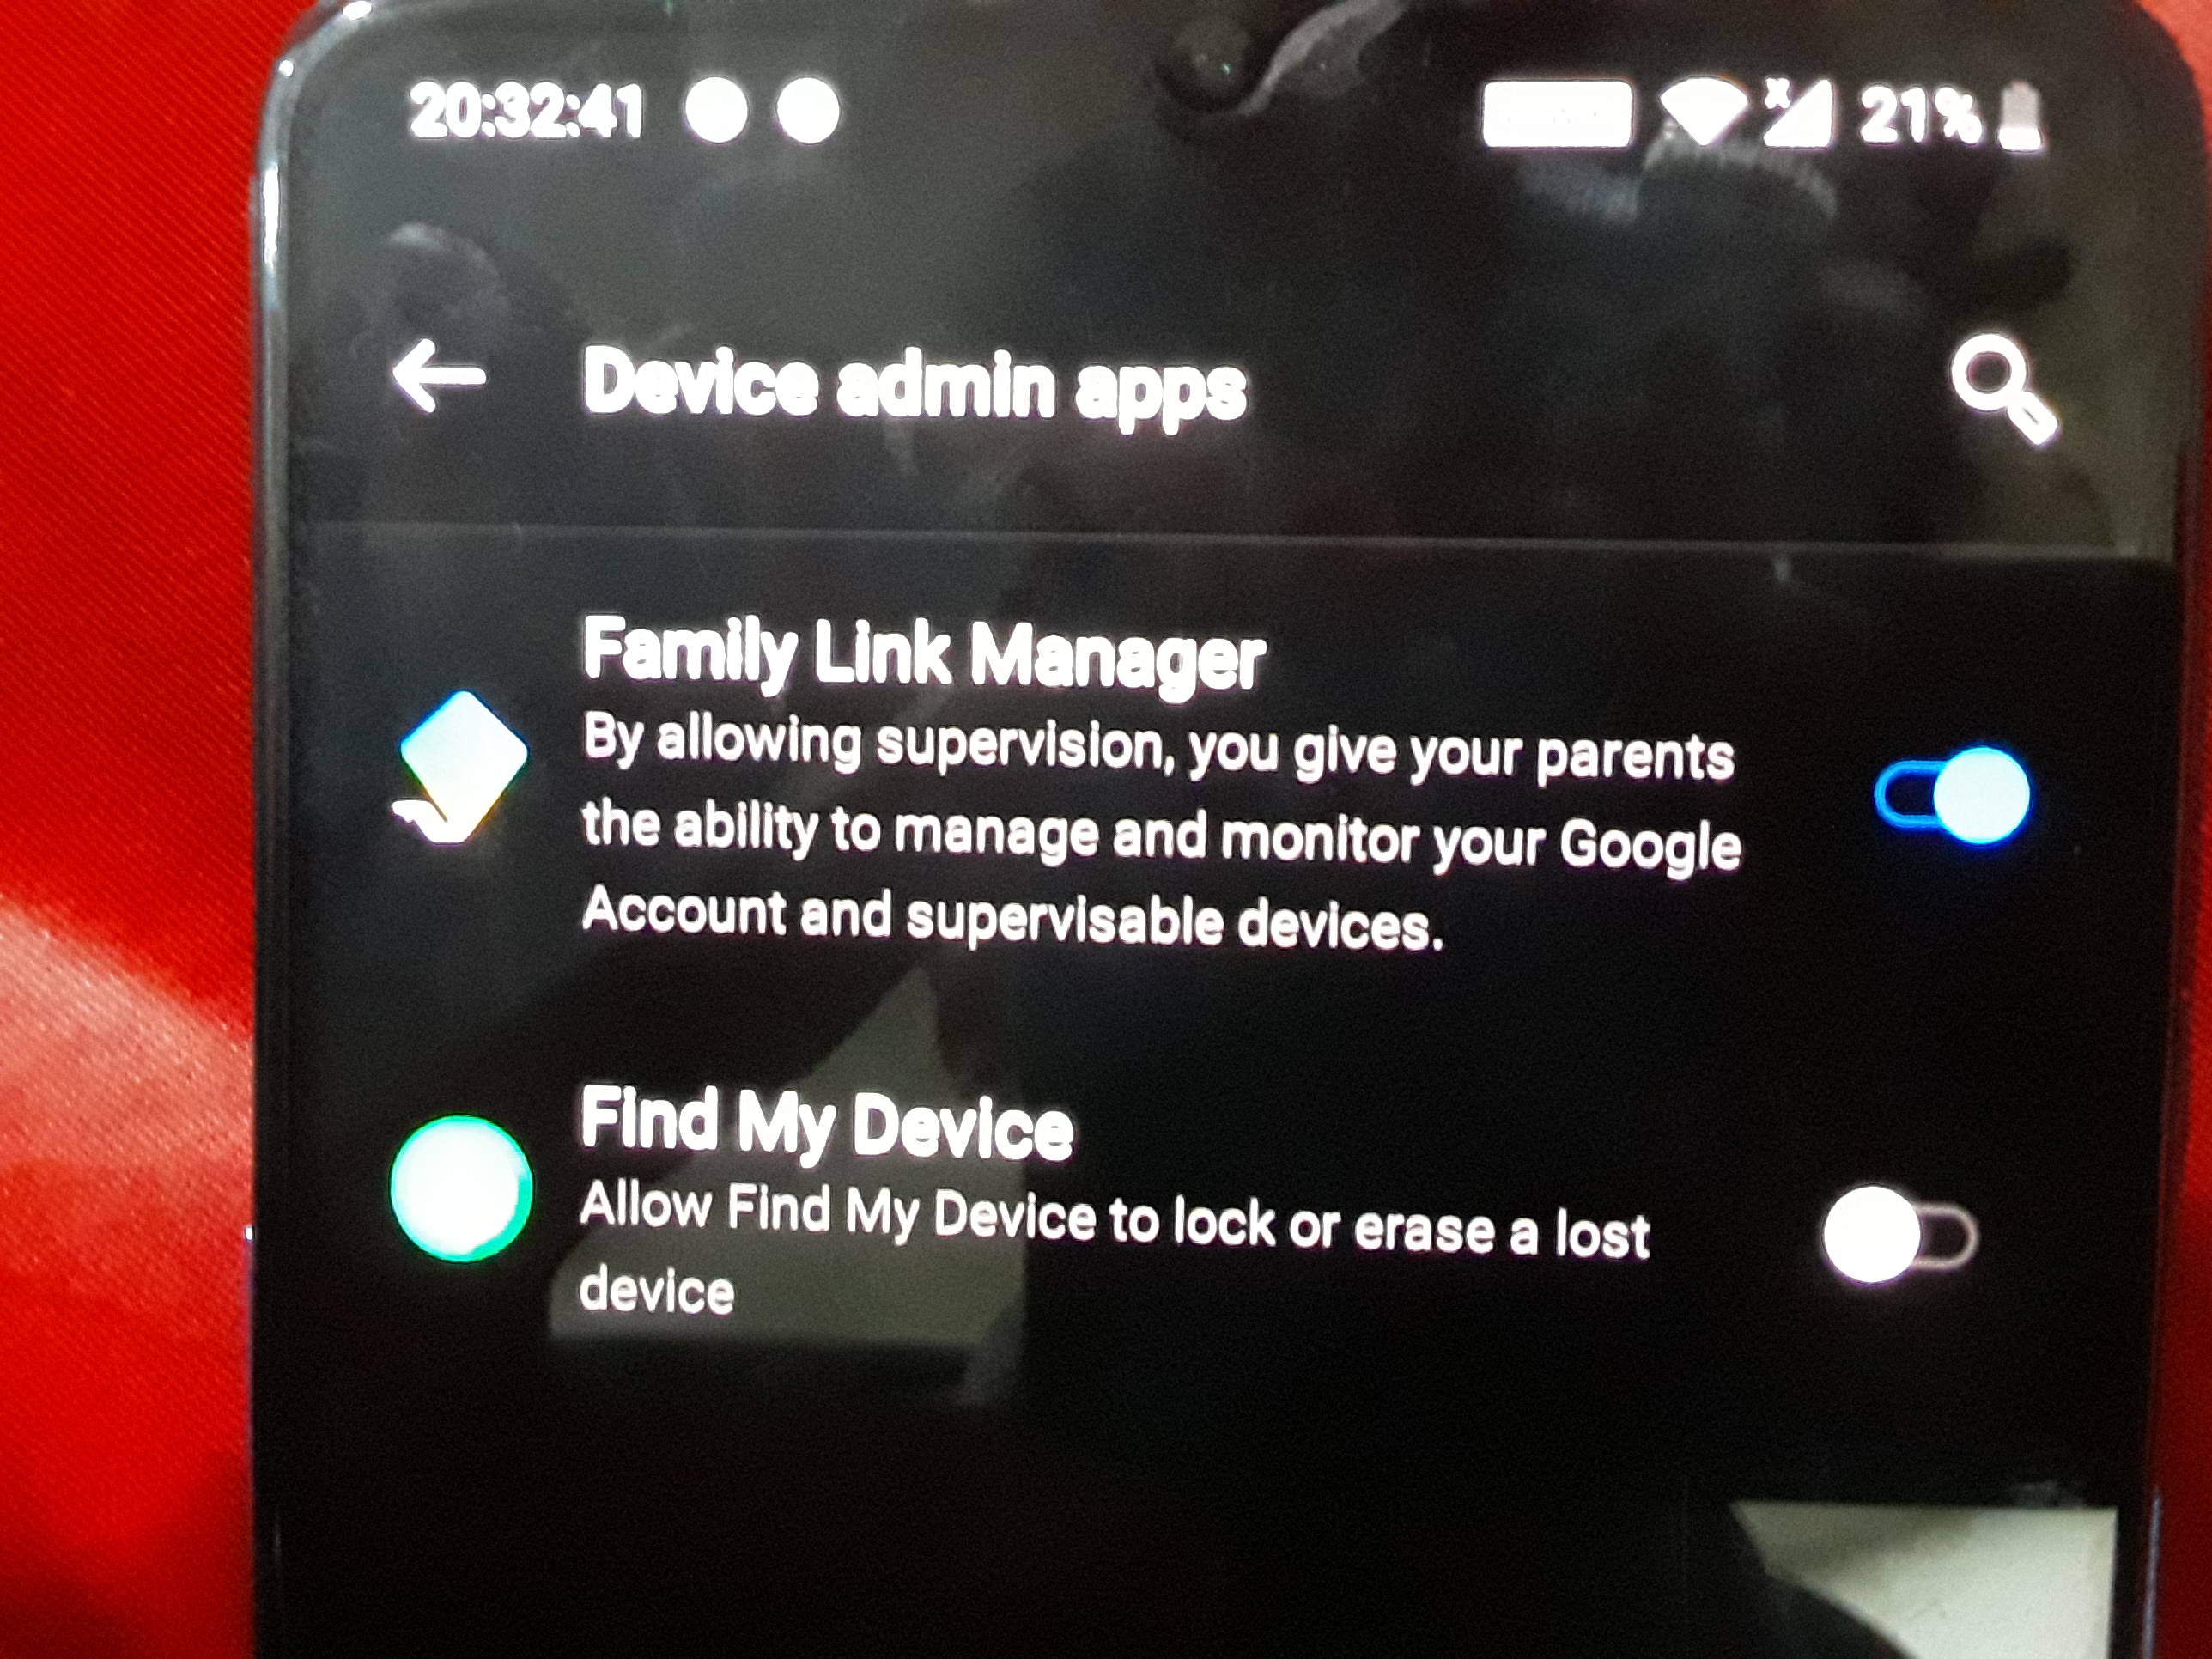 how to get an app without your parents knowing